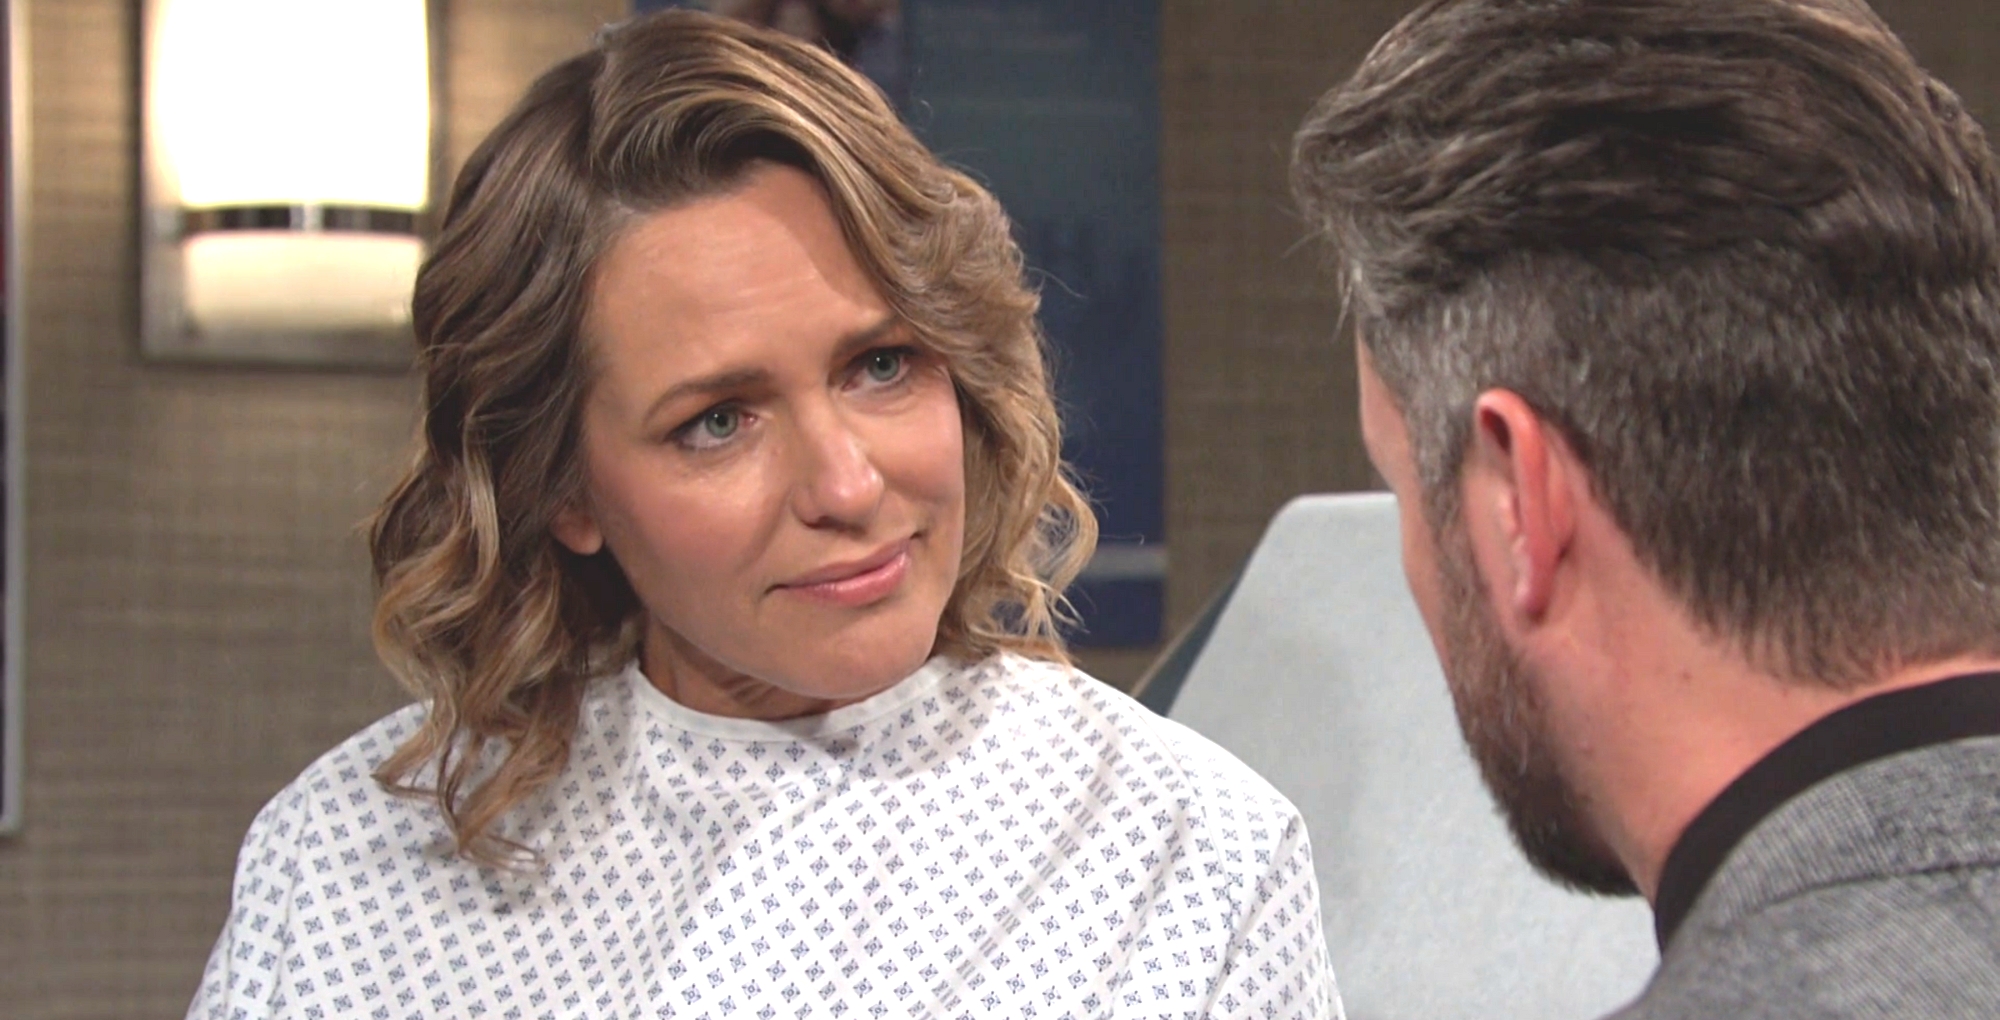 days of our lives recap for monday, may 8, 2023, nicole walker talking to ej.